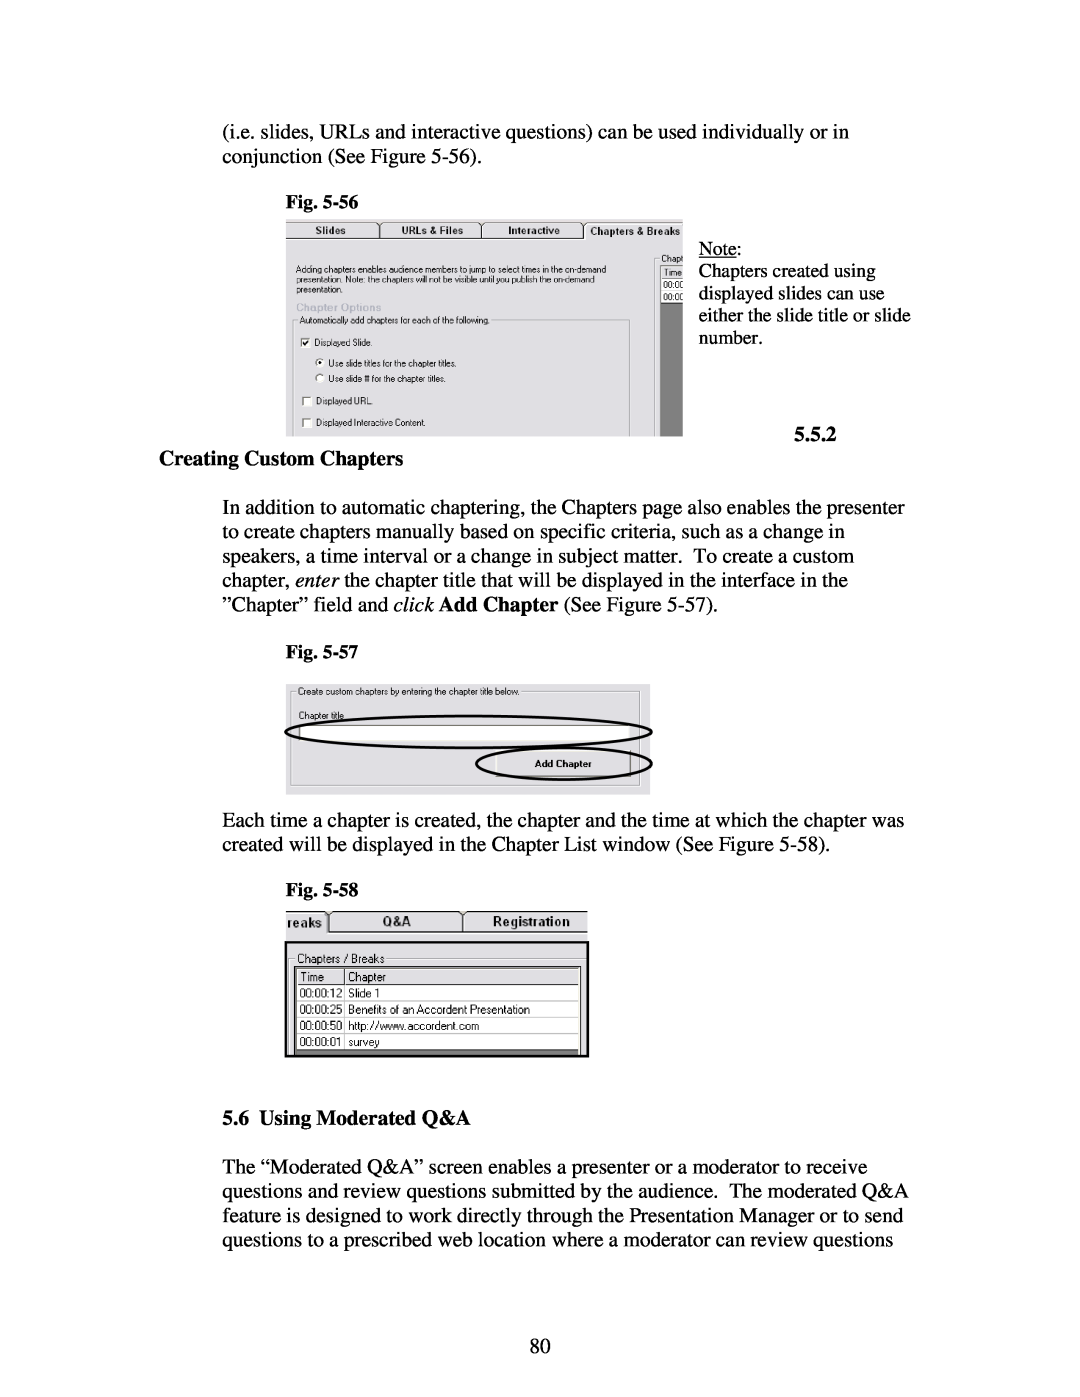 Polycom 6.1 user manual Creating Custom Chapters, Using Moderated Q&A 